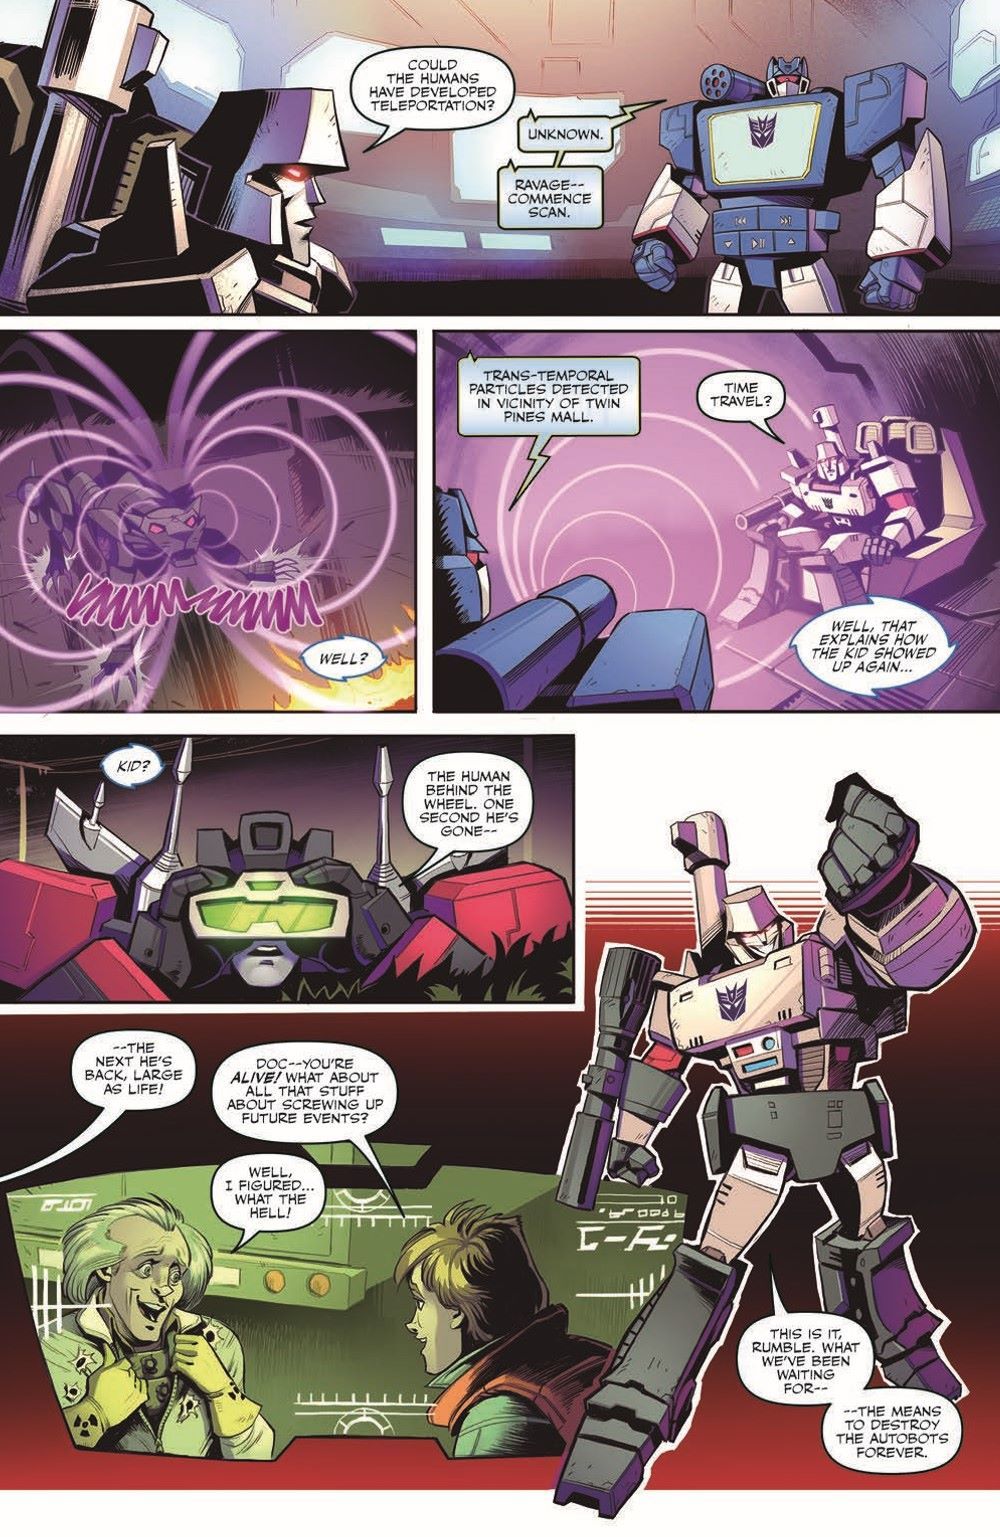 Transformers Back To The Future #1